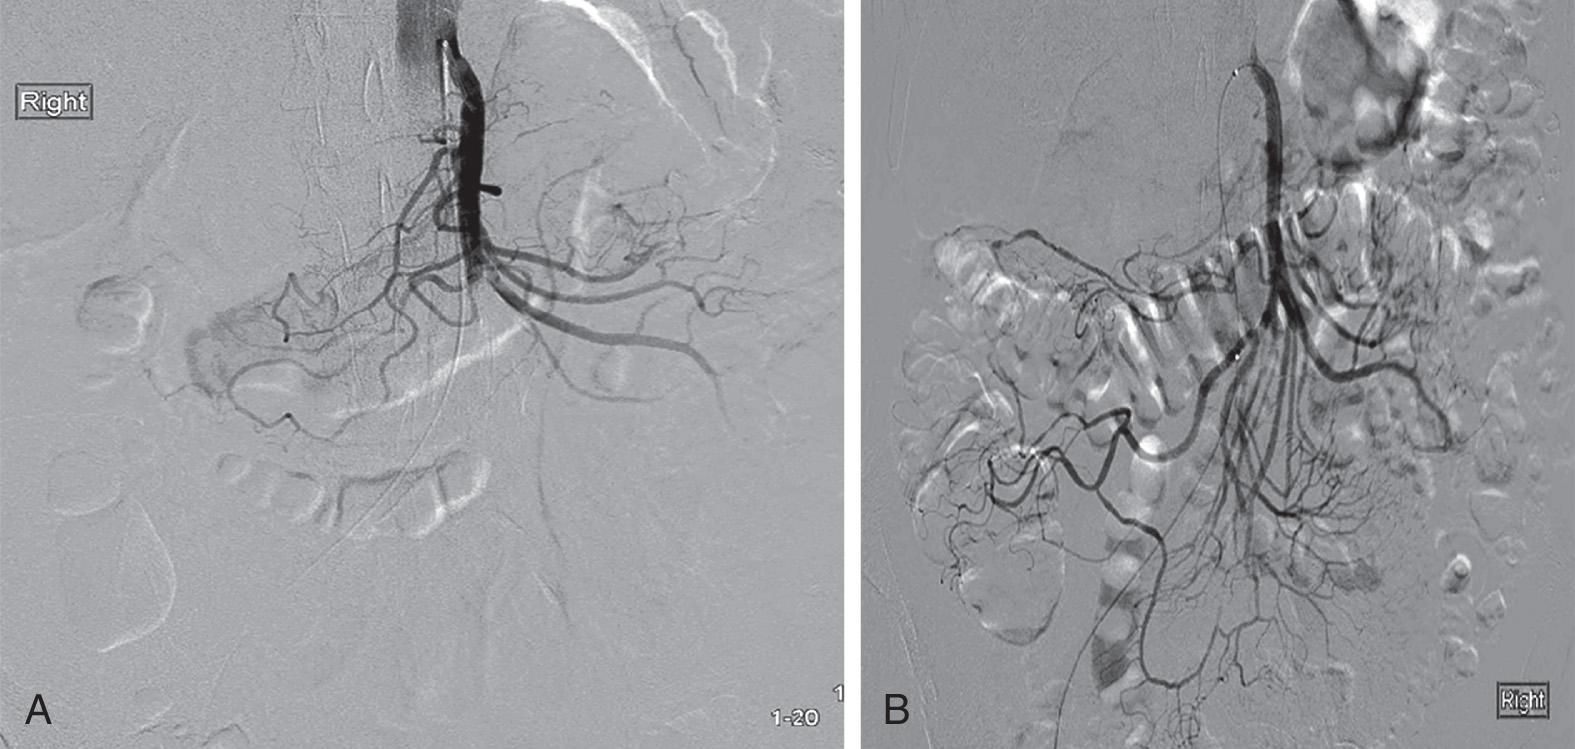 FIGURE 87.2, Computed tomography angiography showing superior mesenteric artery occlusion by embolus.